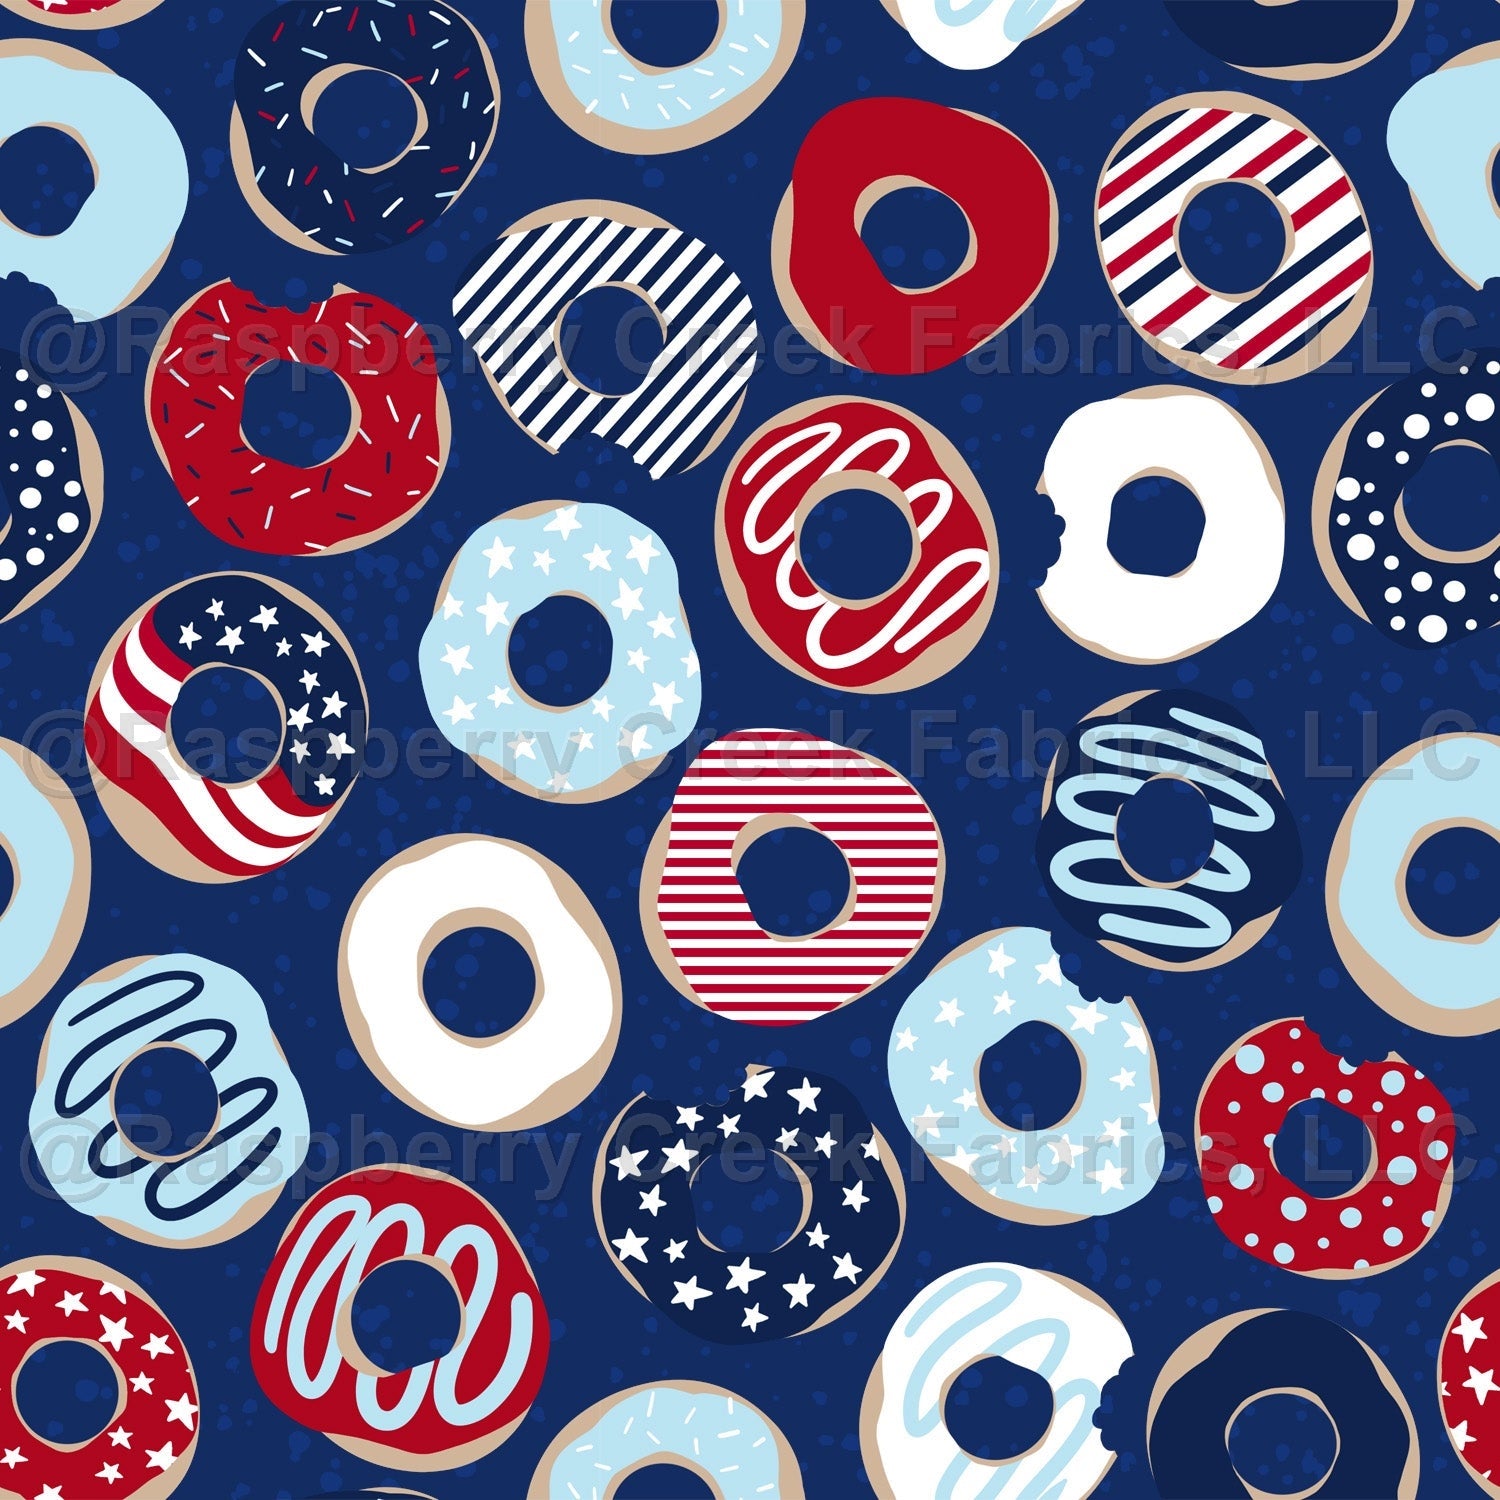 Deep Royal Blue Red and Light Blue Patriotic Donut Print Fabric, Americana by Brittney Laidlaw